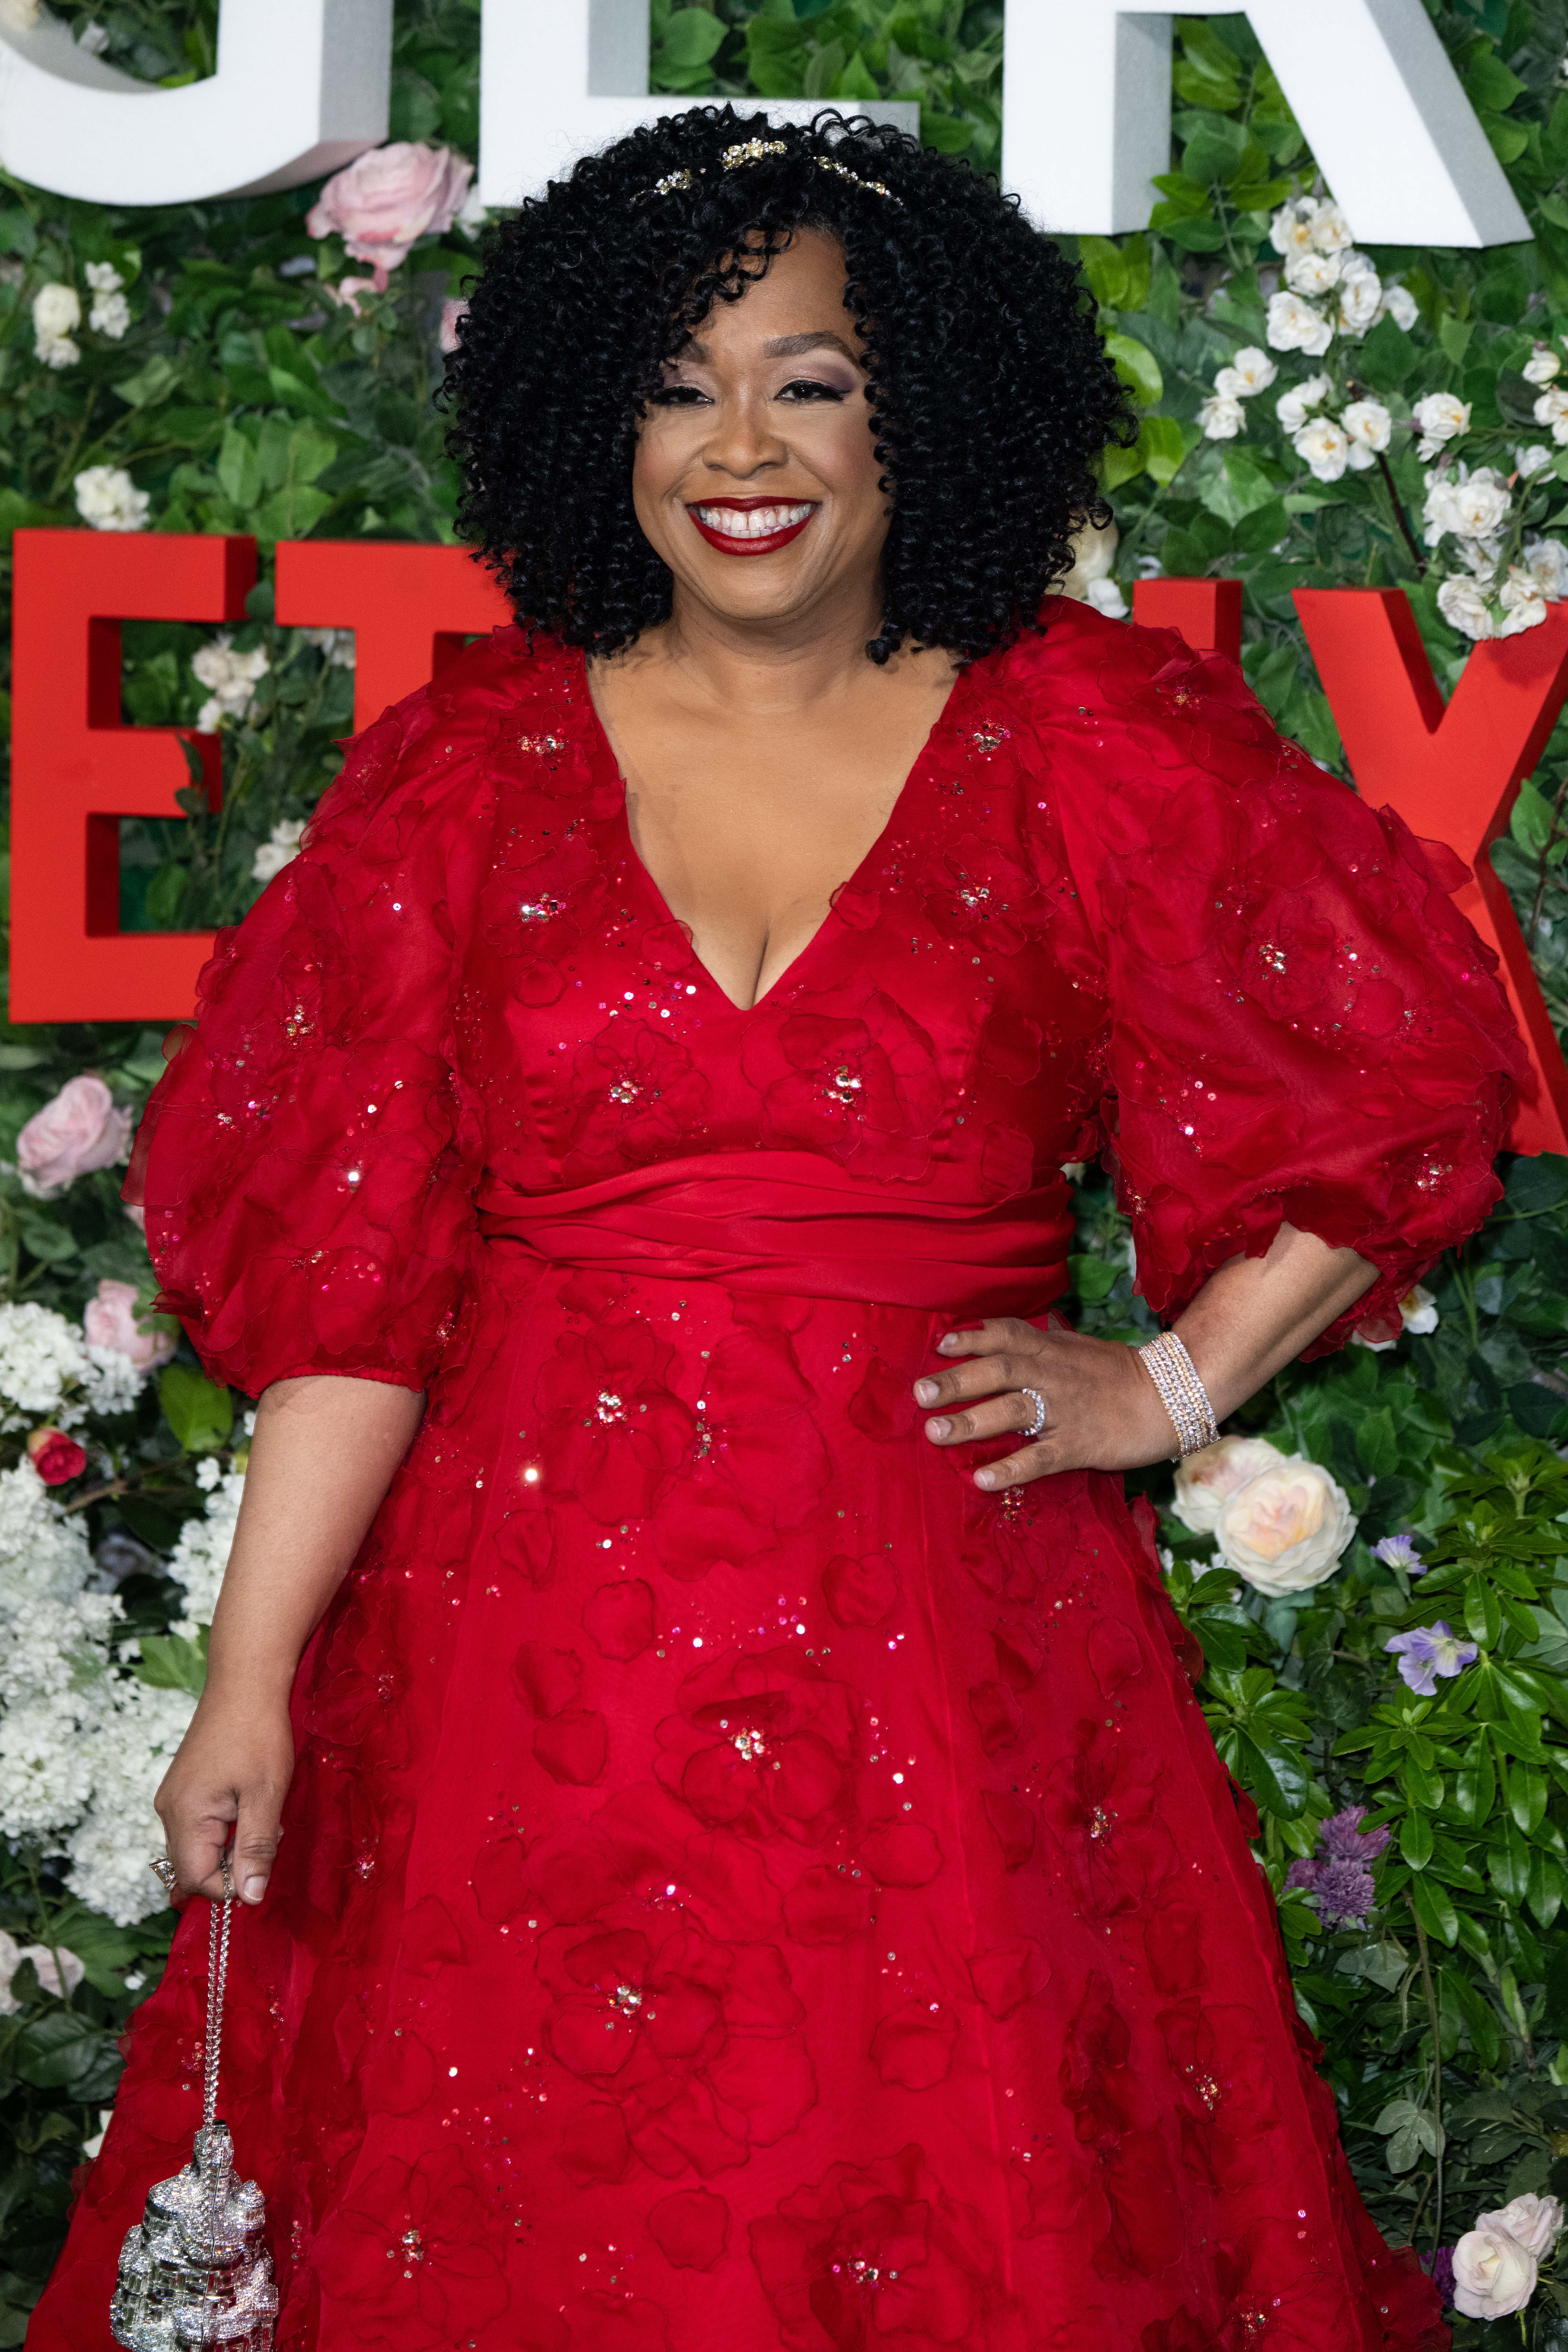 Shonda Rhimes at the "Bridgerton" Series 2 world premiere in 2022 in London, England. | Source: Getty Images